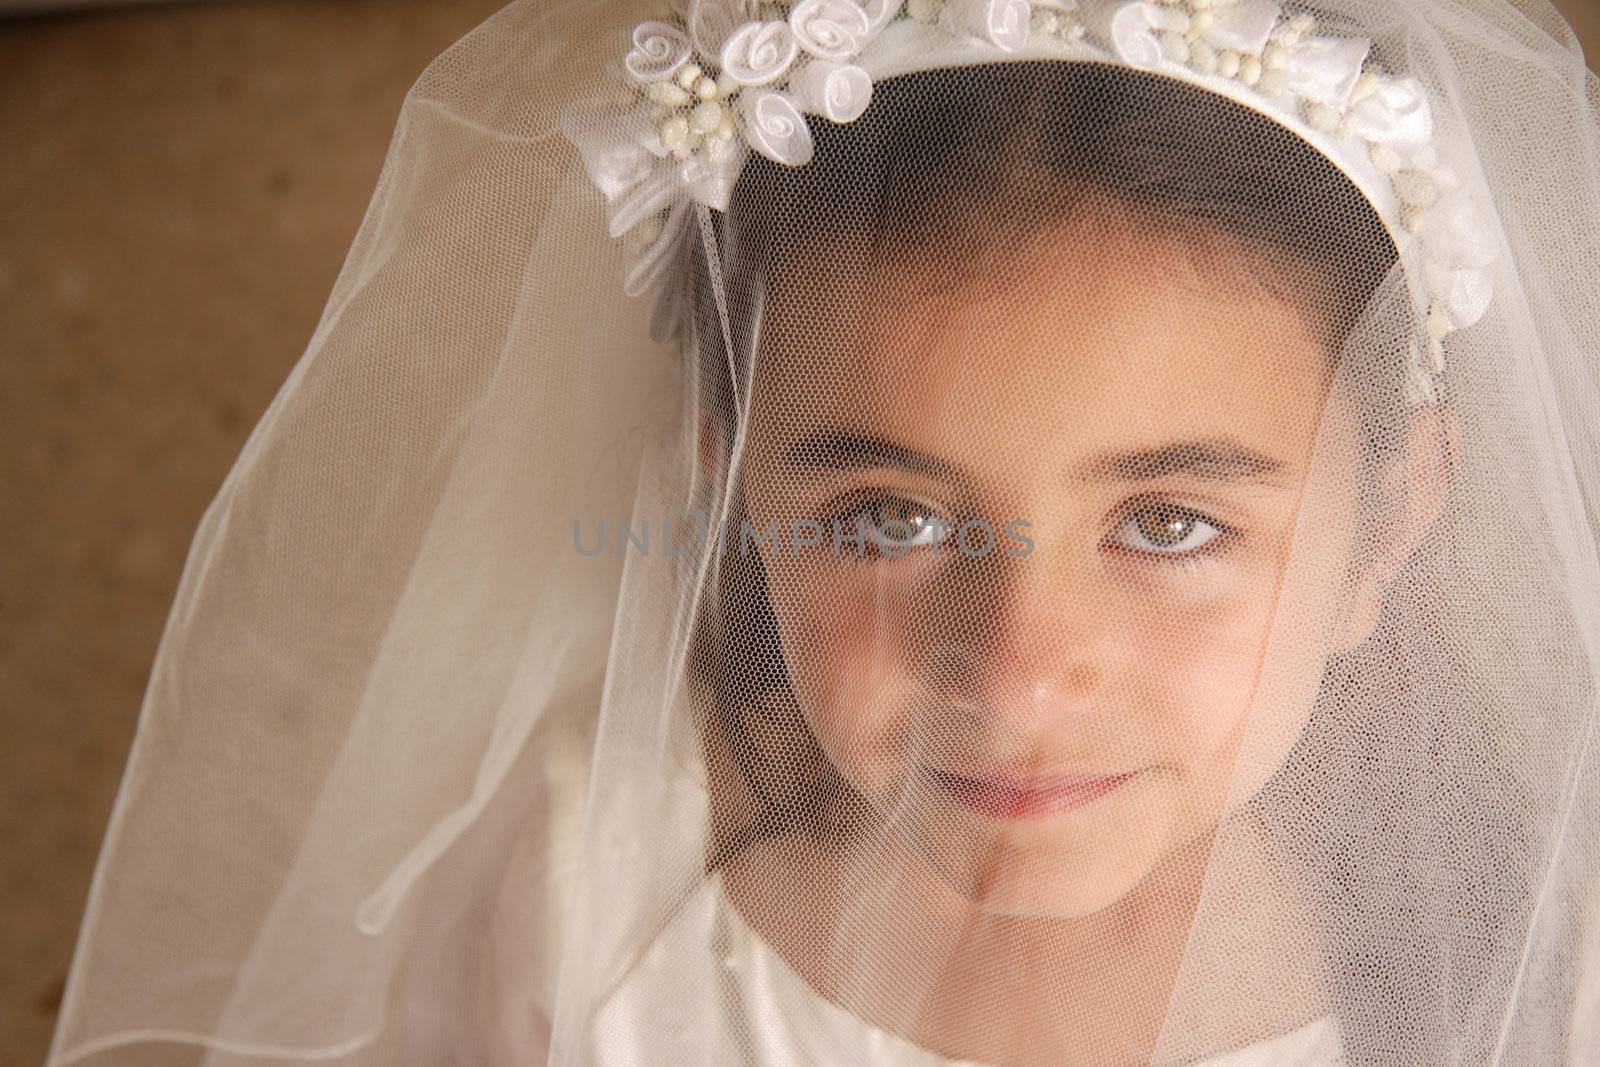 A young girl in her holy communion outfit looking at the camera from behind her veil. Stunning green eyes